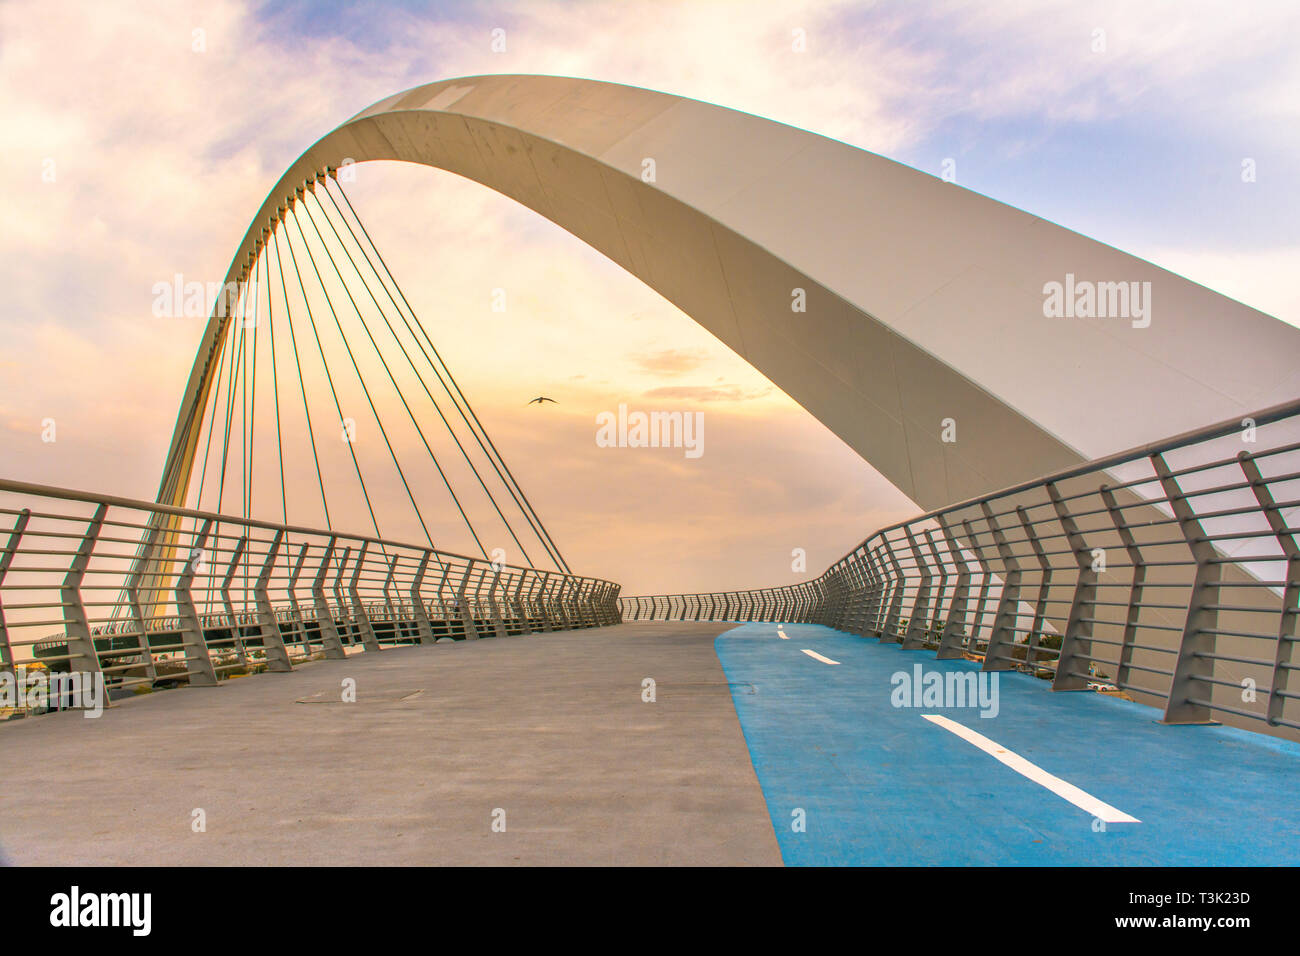 Tolerance Bridge Dubai sunset view of Water canal famous tourist attraction of middle east creative modern architecture Stock Photo